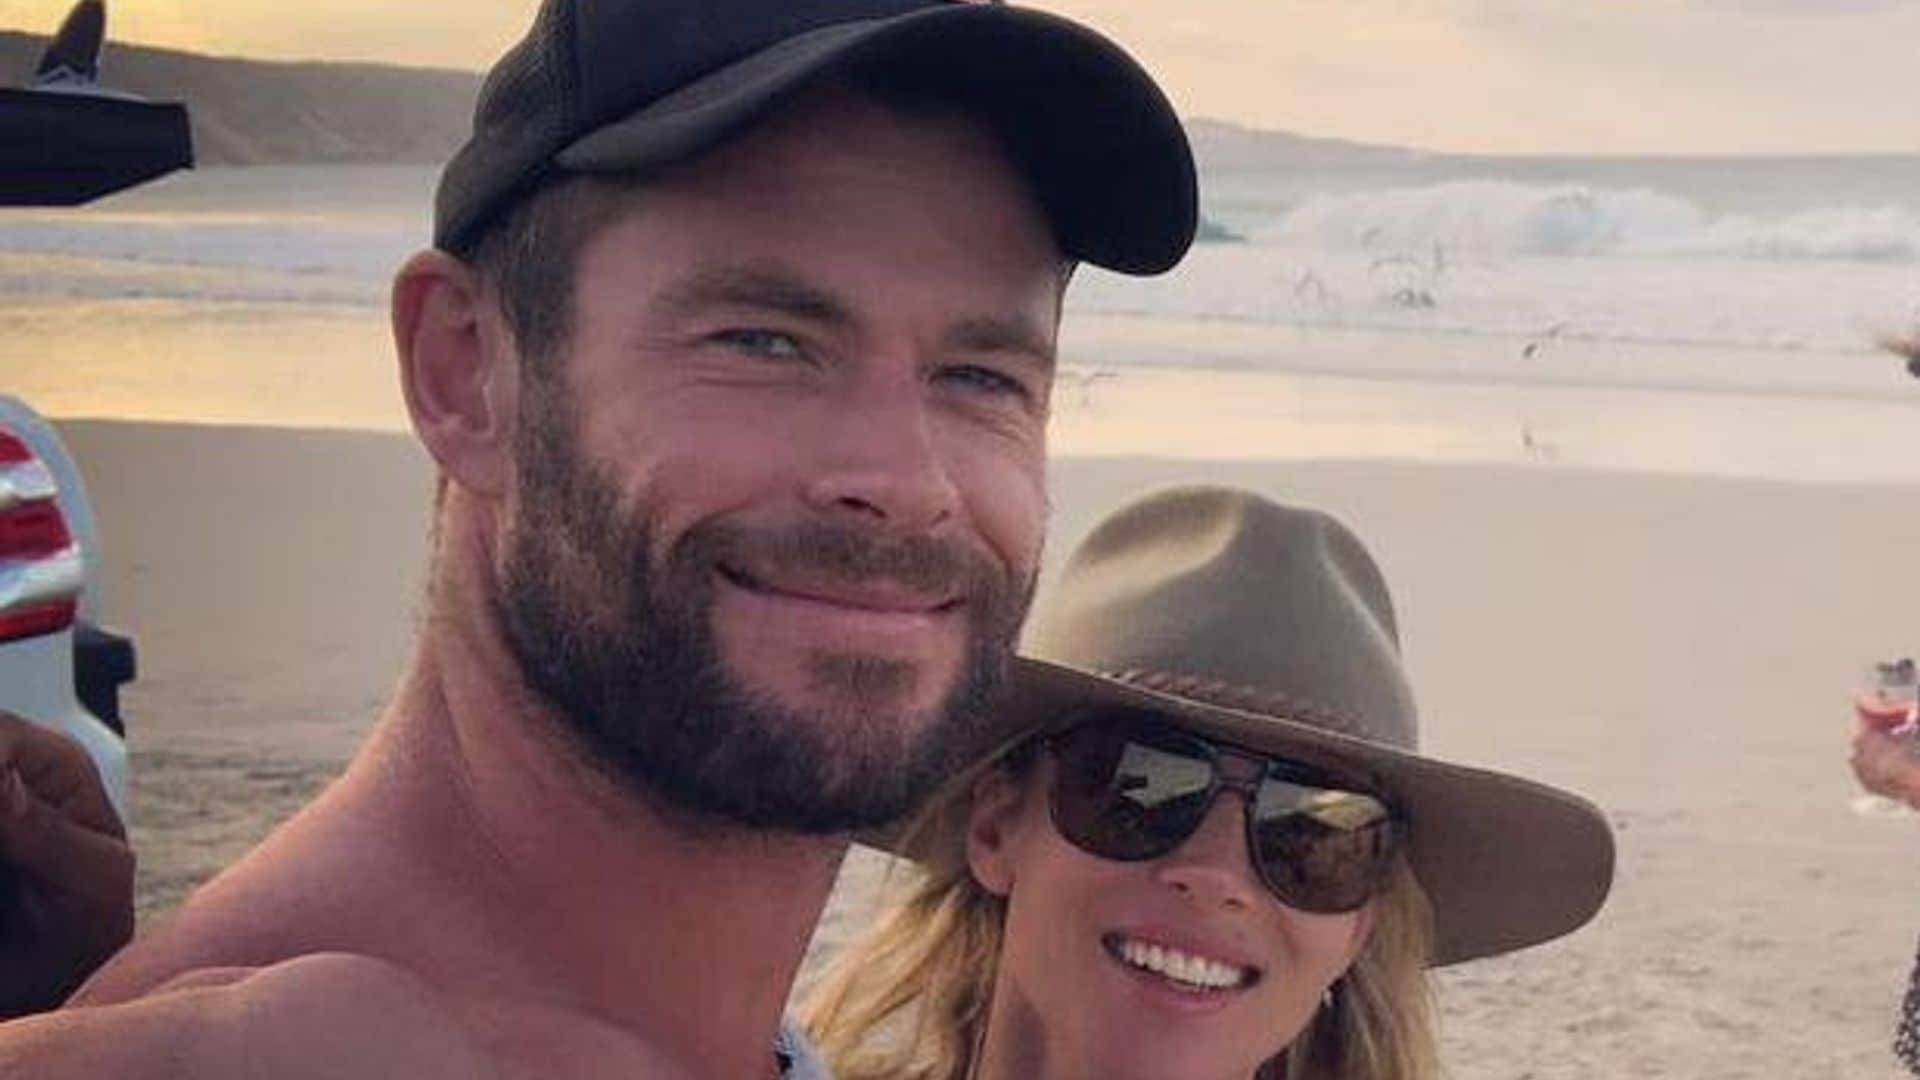 Chris Hemsworth and Elsa Pataky donate $1 million to support fight against Australian wildfires